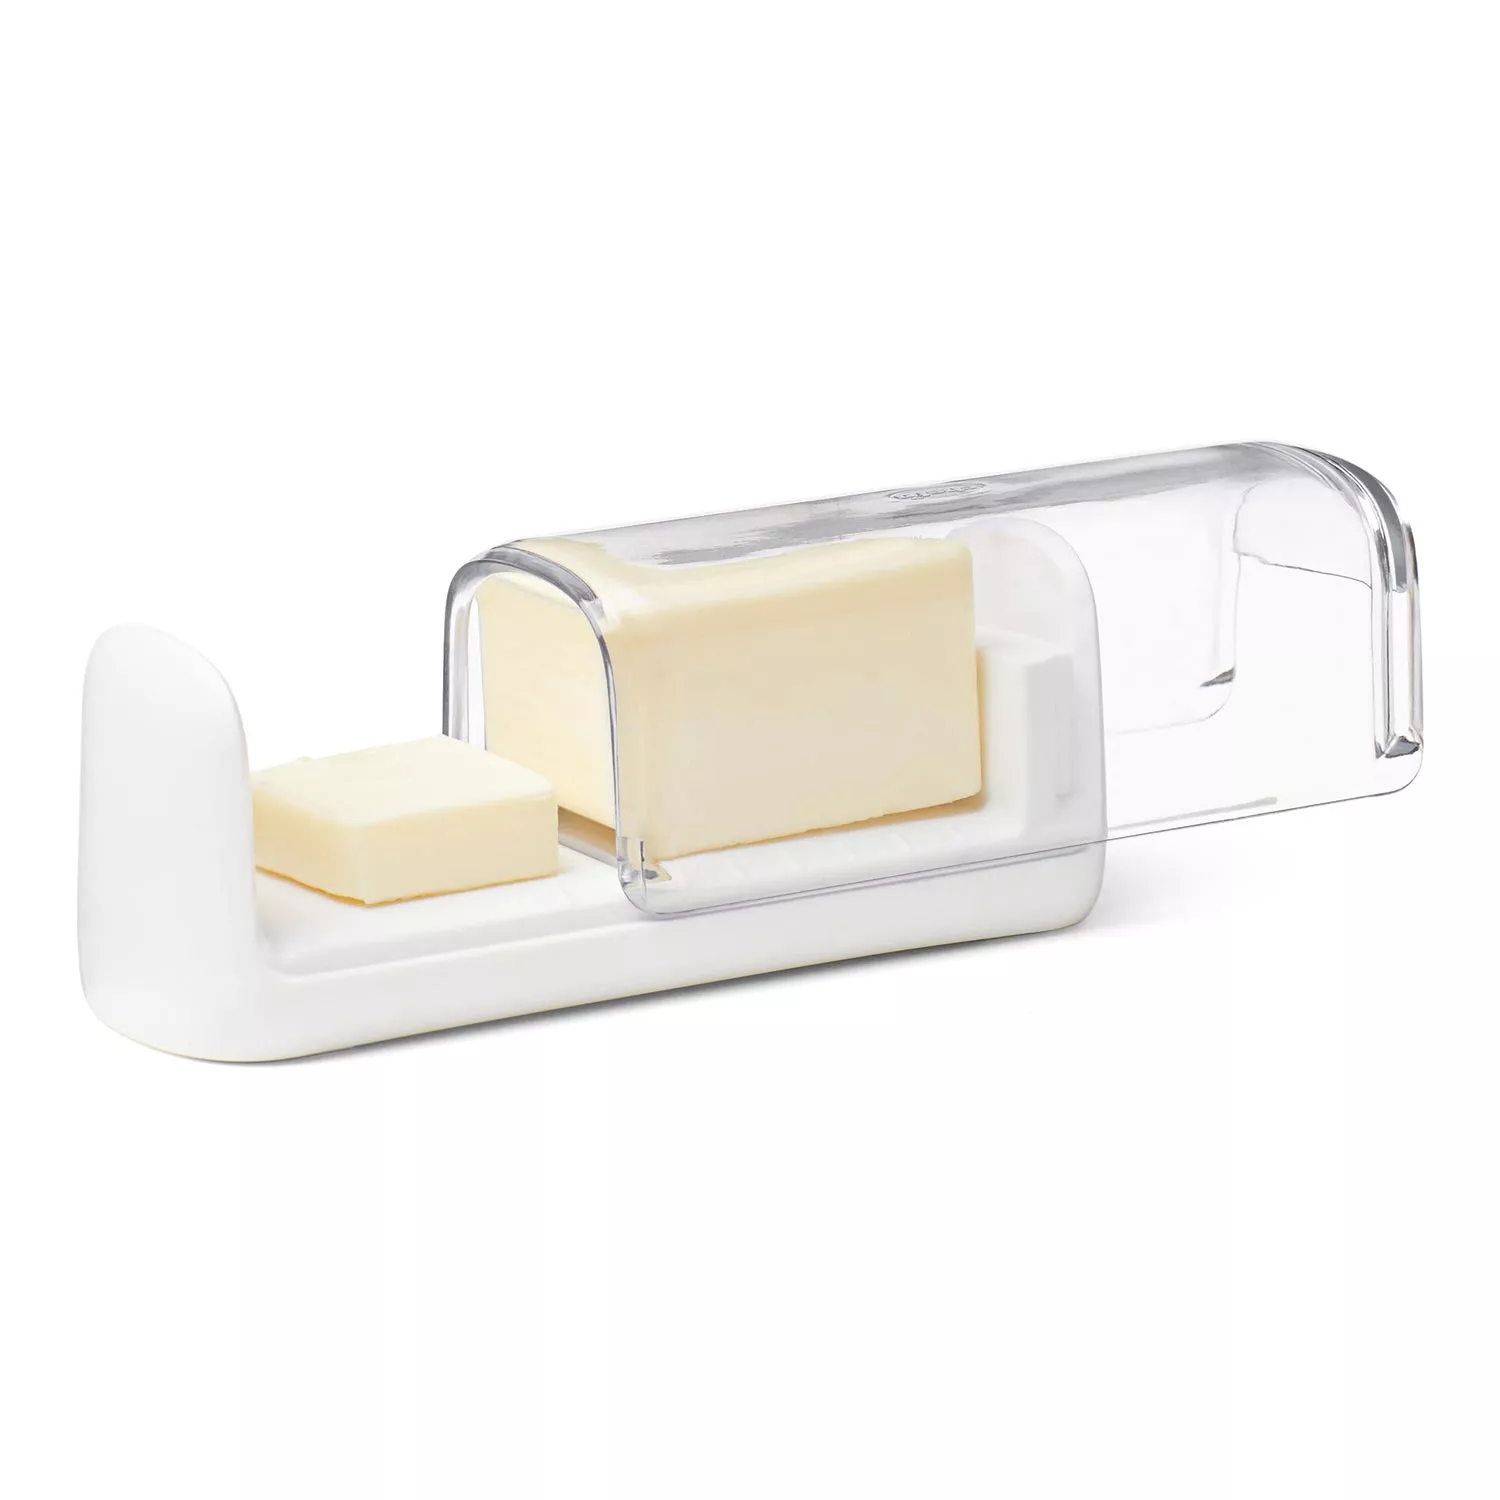 Chef'n Slice'N Store Butter Dish, White